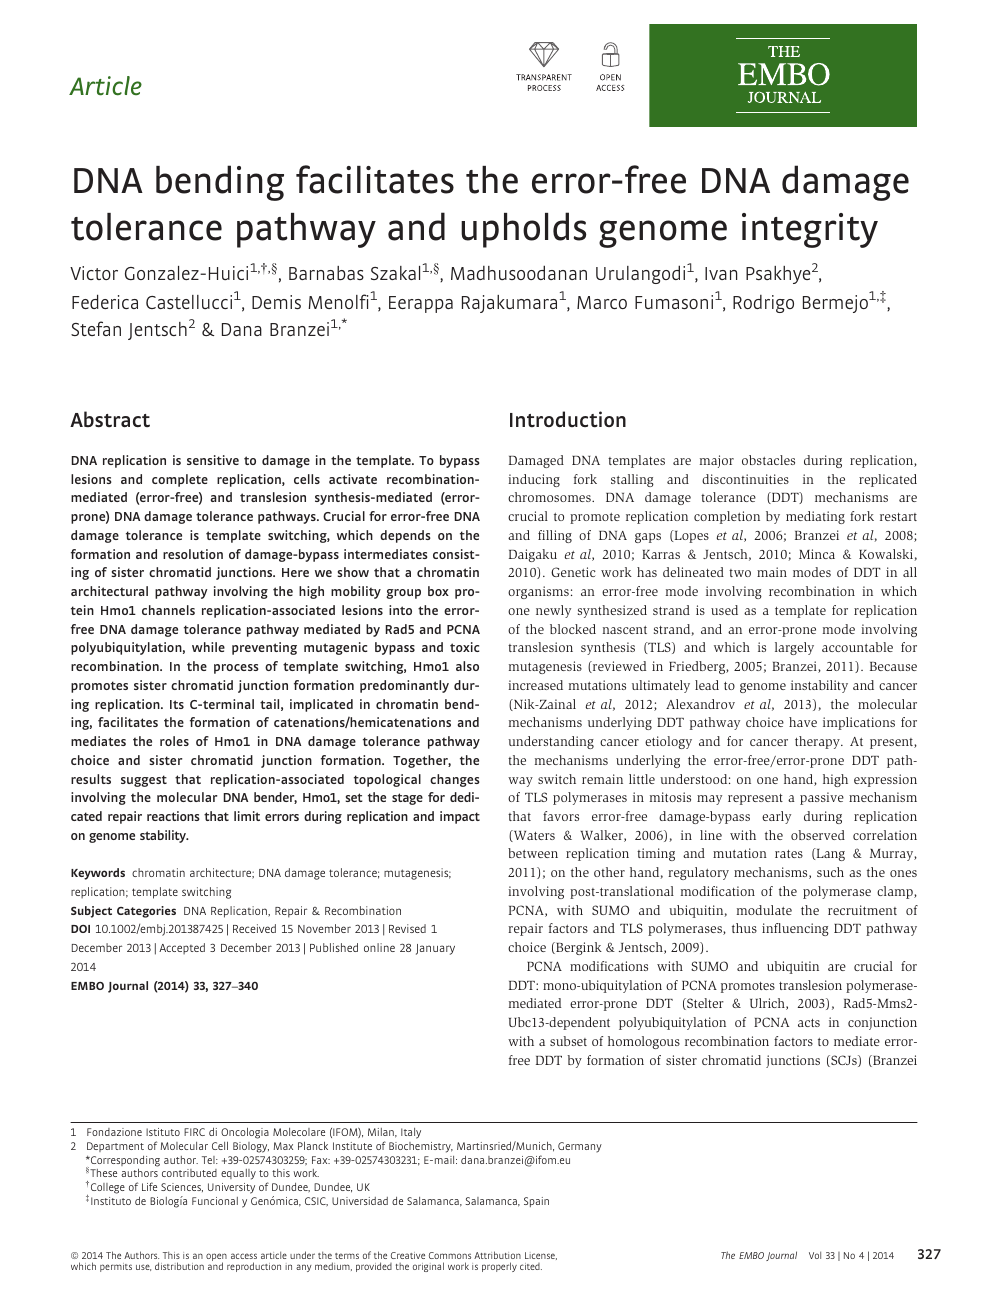 Dna Bending Facilitates The Error Free Dna Damage Tolerance Pathway And Upholds Genome Integrity Topic Of Research Paper In Biological Sciences Download Scholarly Article Pdf And Read For Free On Cyberleninka Open